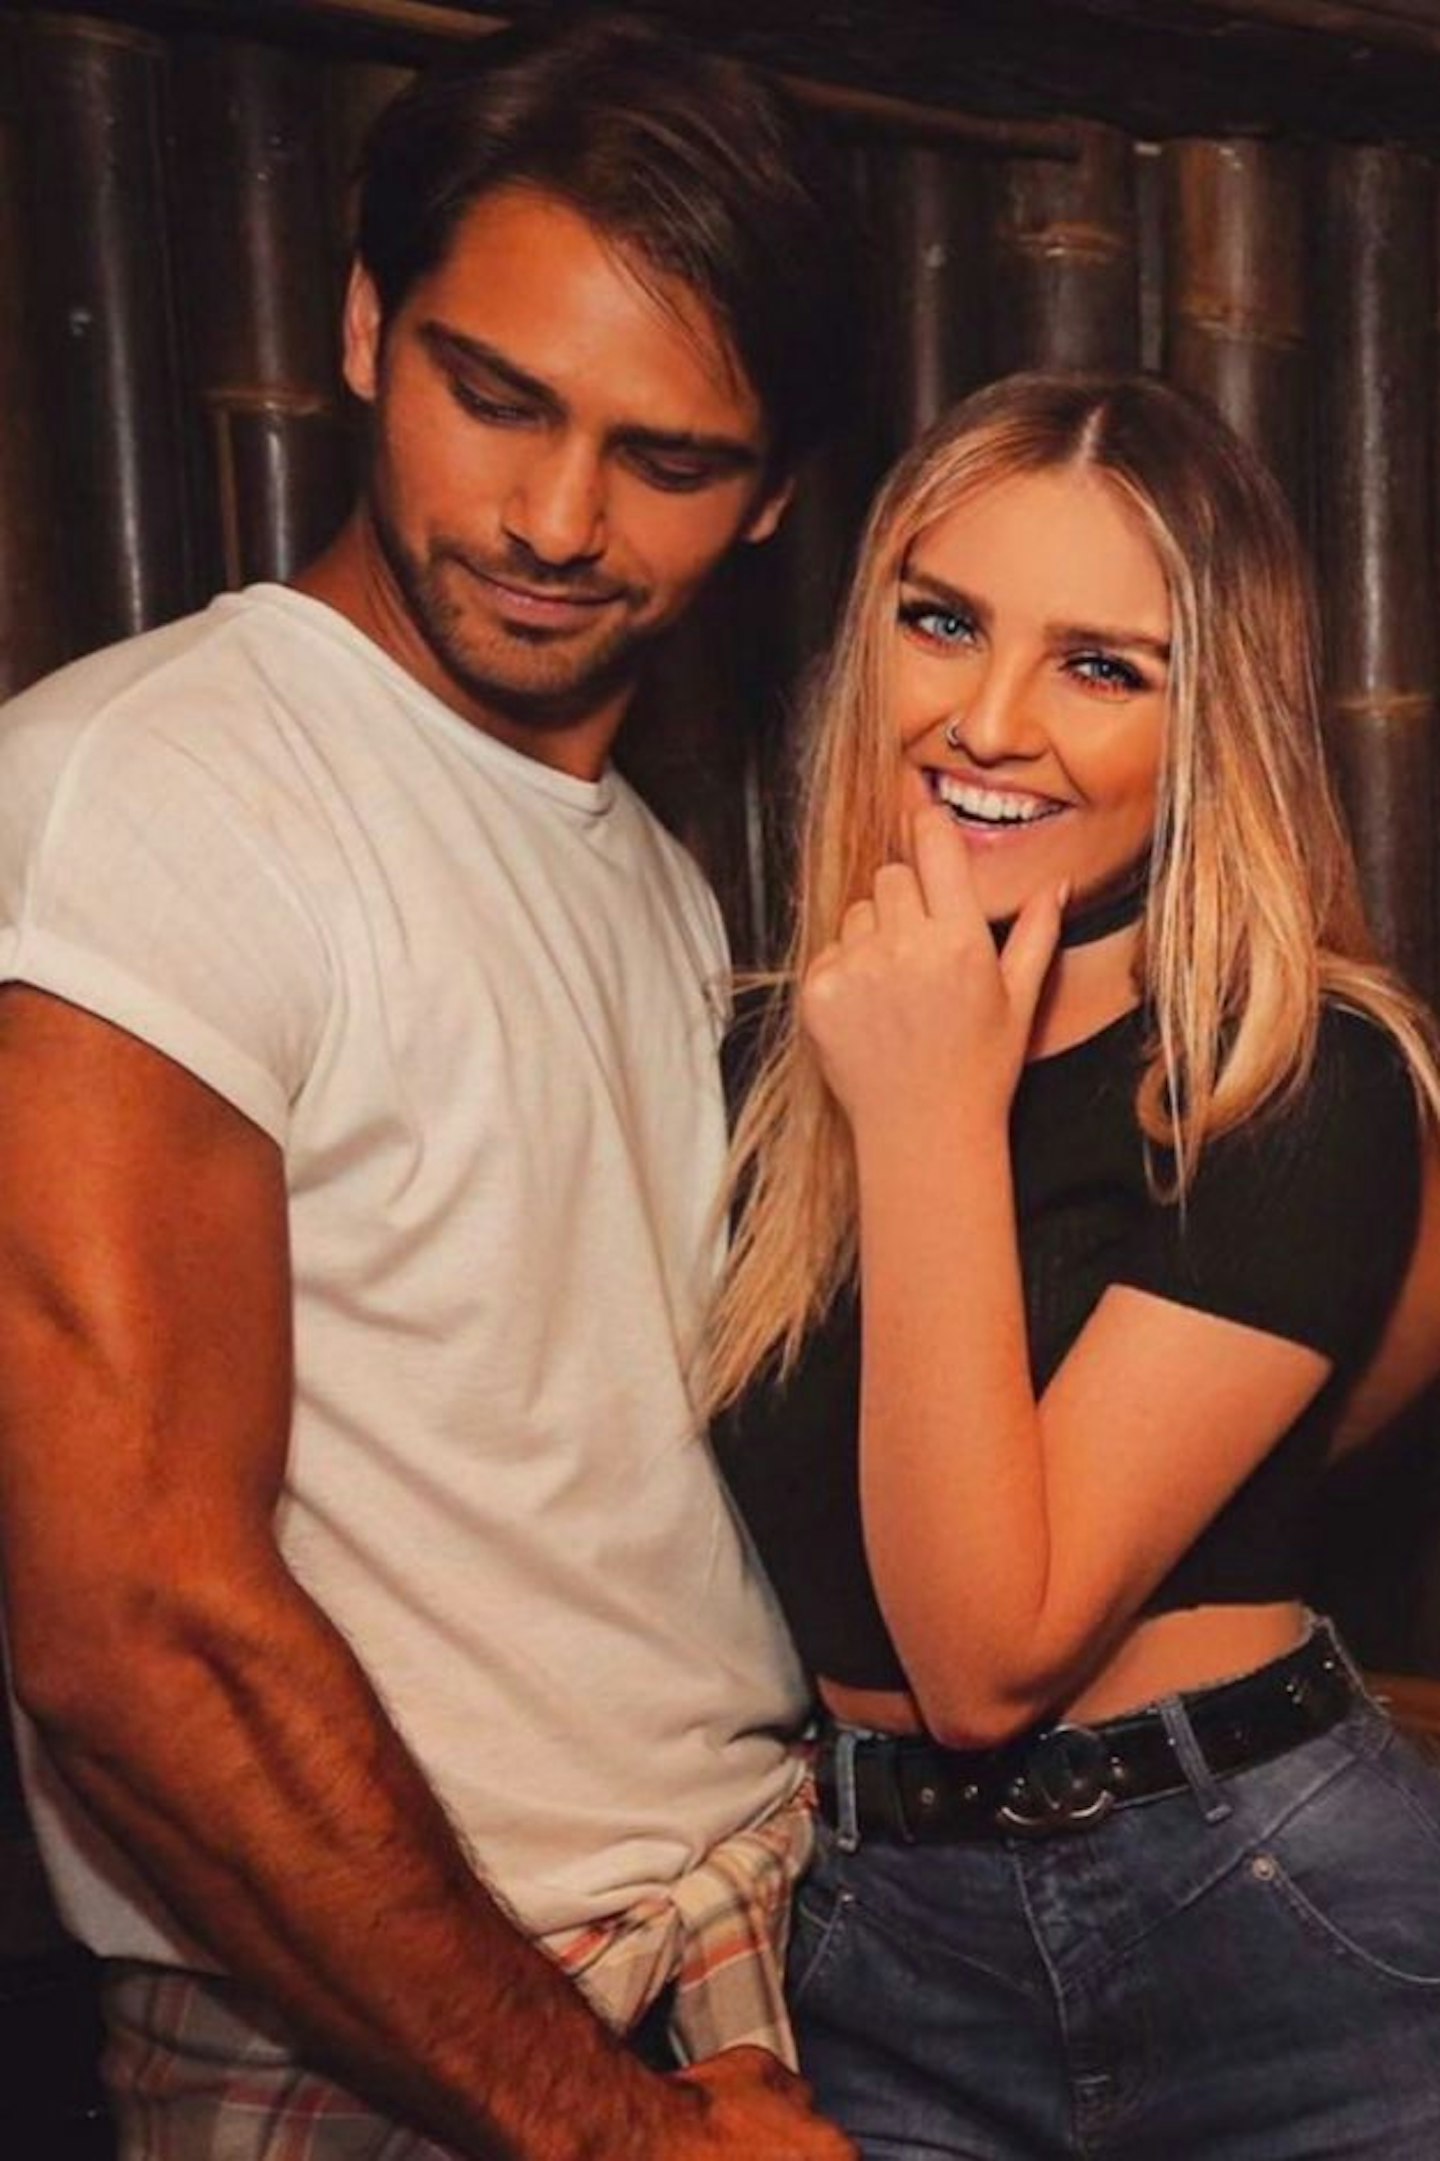 Perrie Edwards and Luke Pasqualino were pictured hitting it off earlier this month